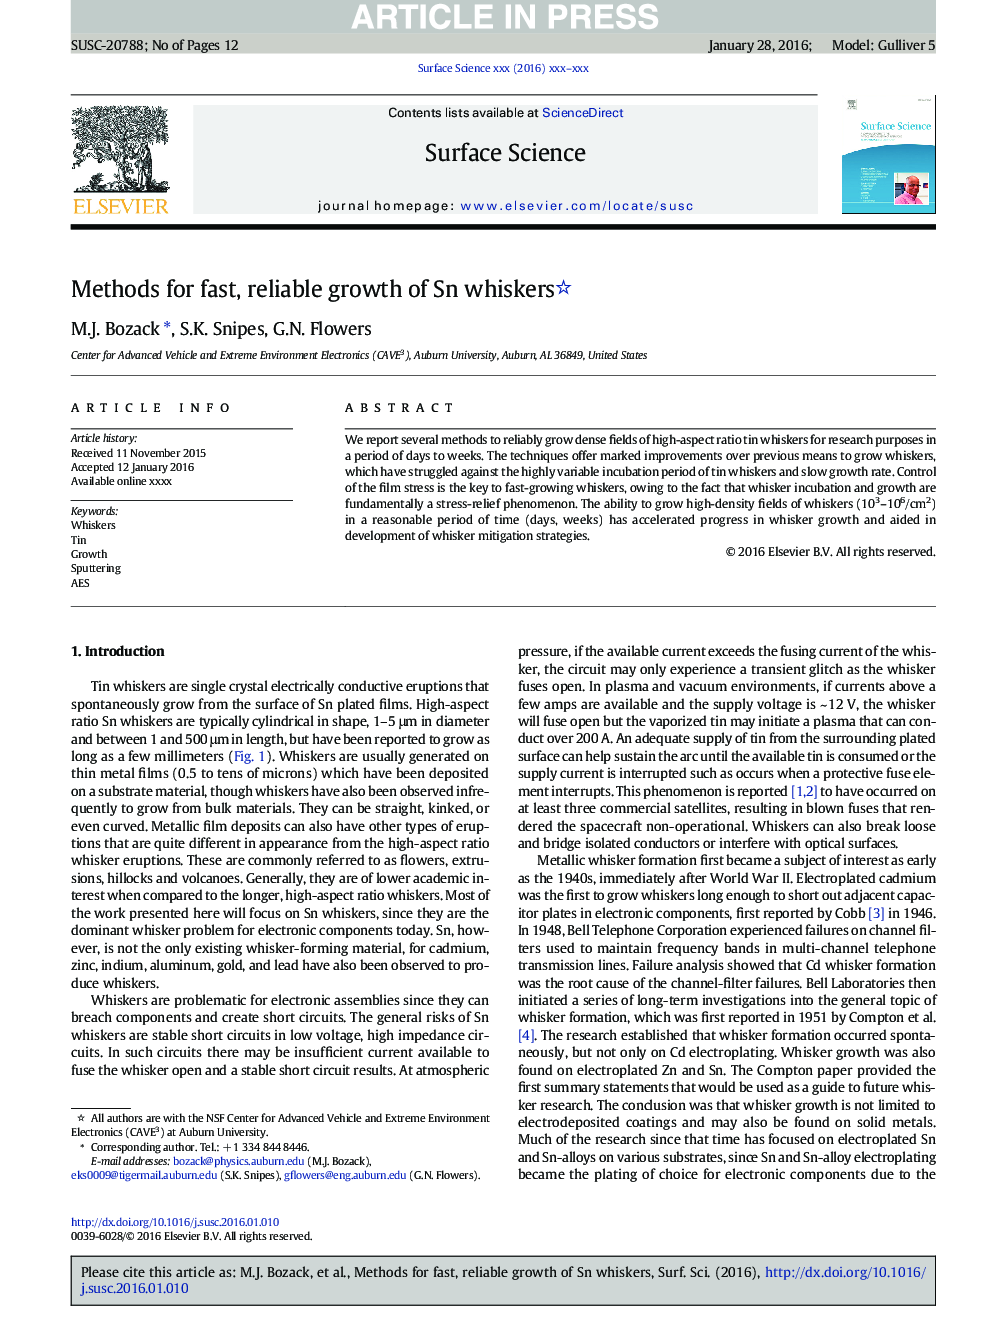 Methods for fast, reliable growth of Sn whiskers